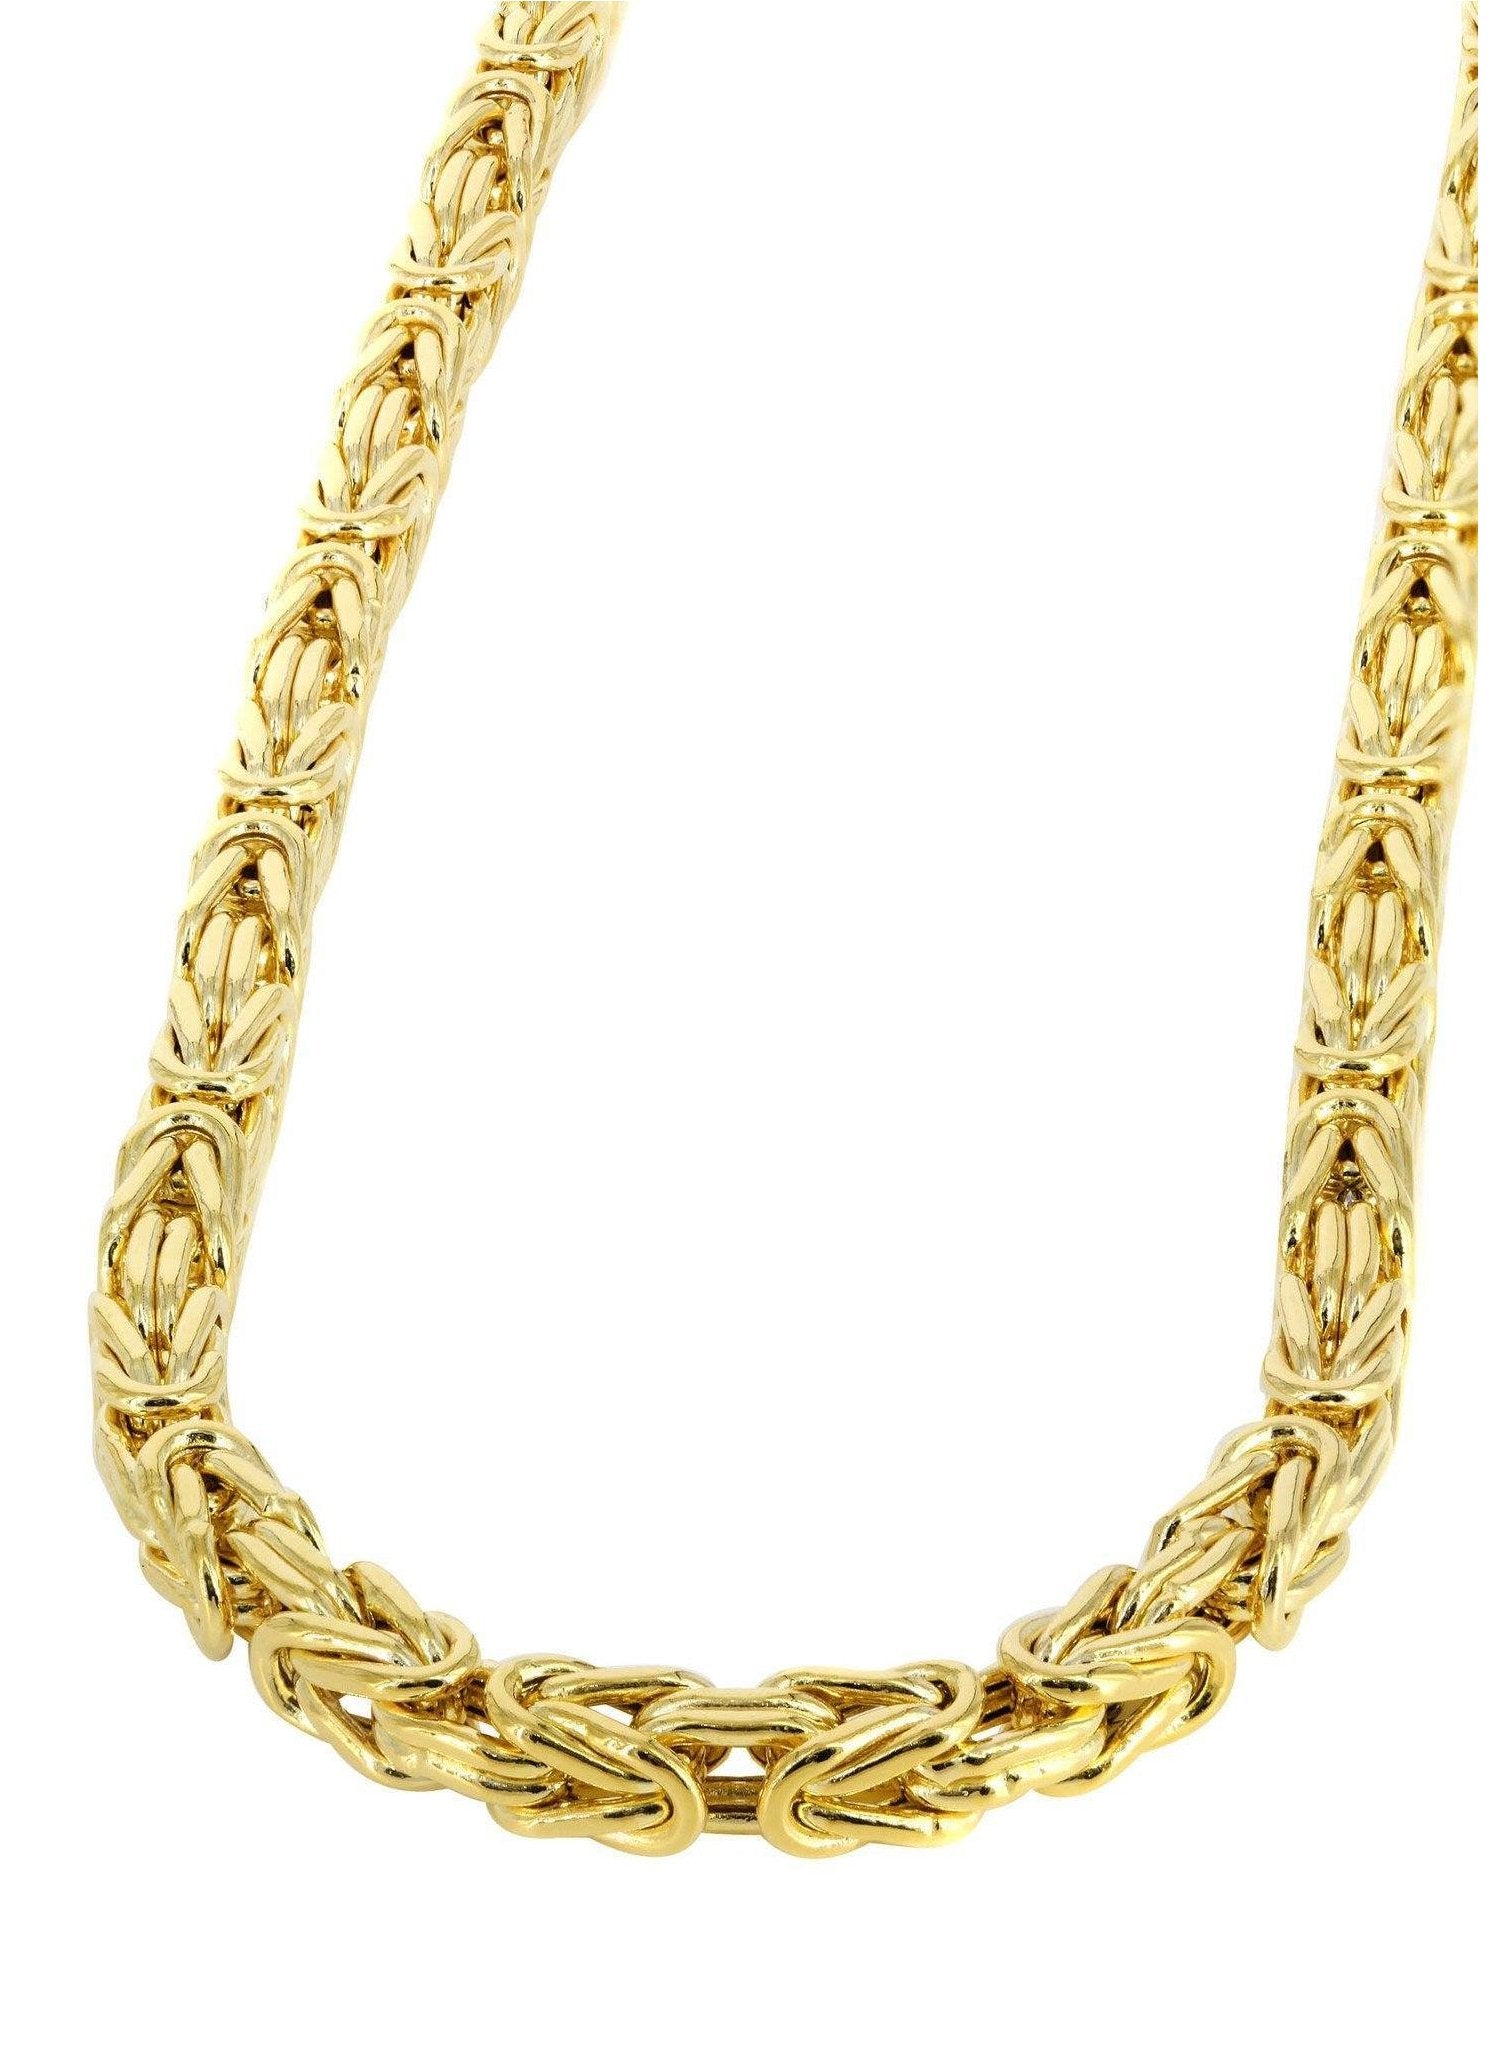 4.5MM 100 Byzantine Chain Yellow Gold .925 Sterling Silver Length 8"-28" Inches